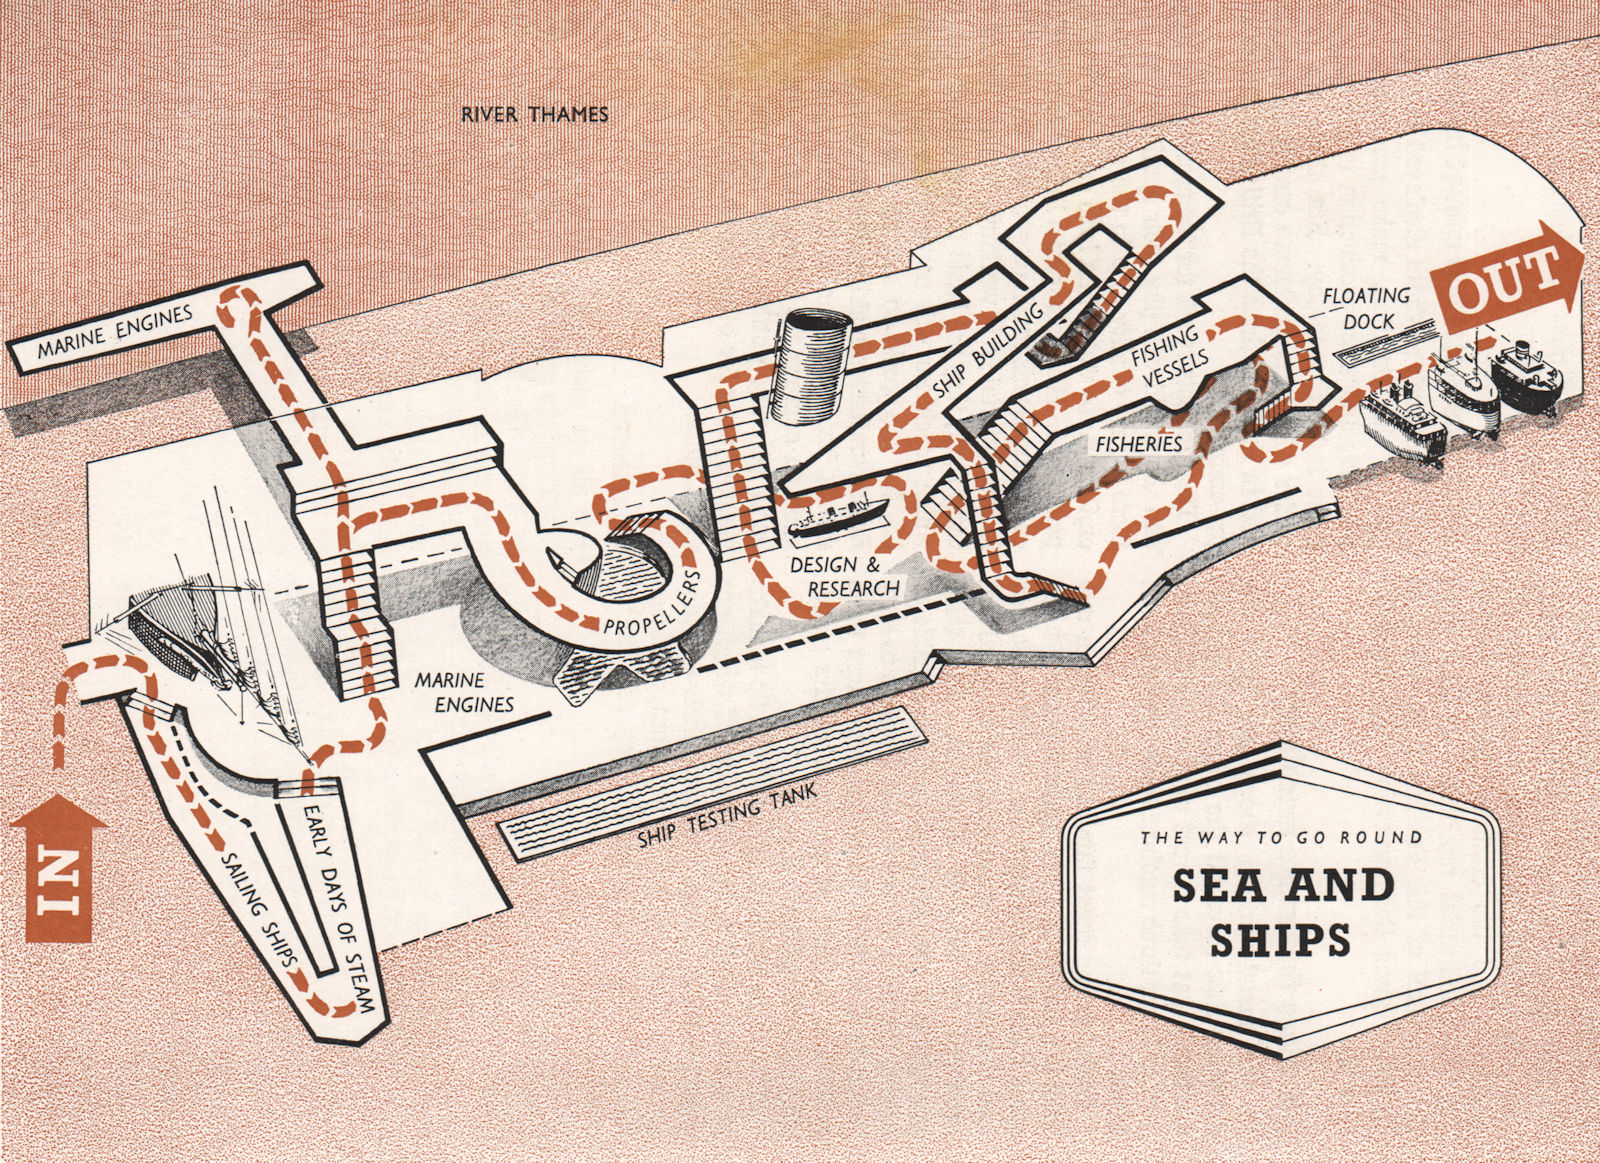 Associate Product FESTIVAL OF BRITAIN. Sea and Ships exhibit. Tour plan 1951 old vintage map